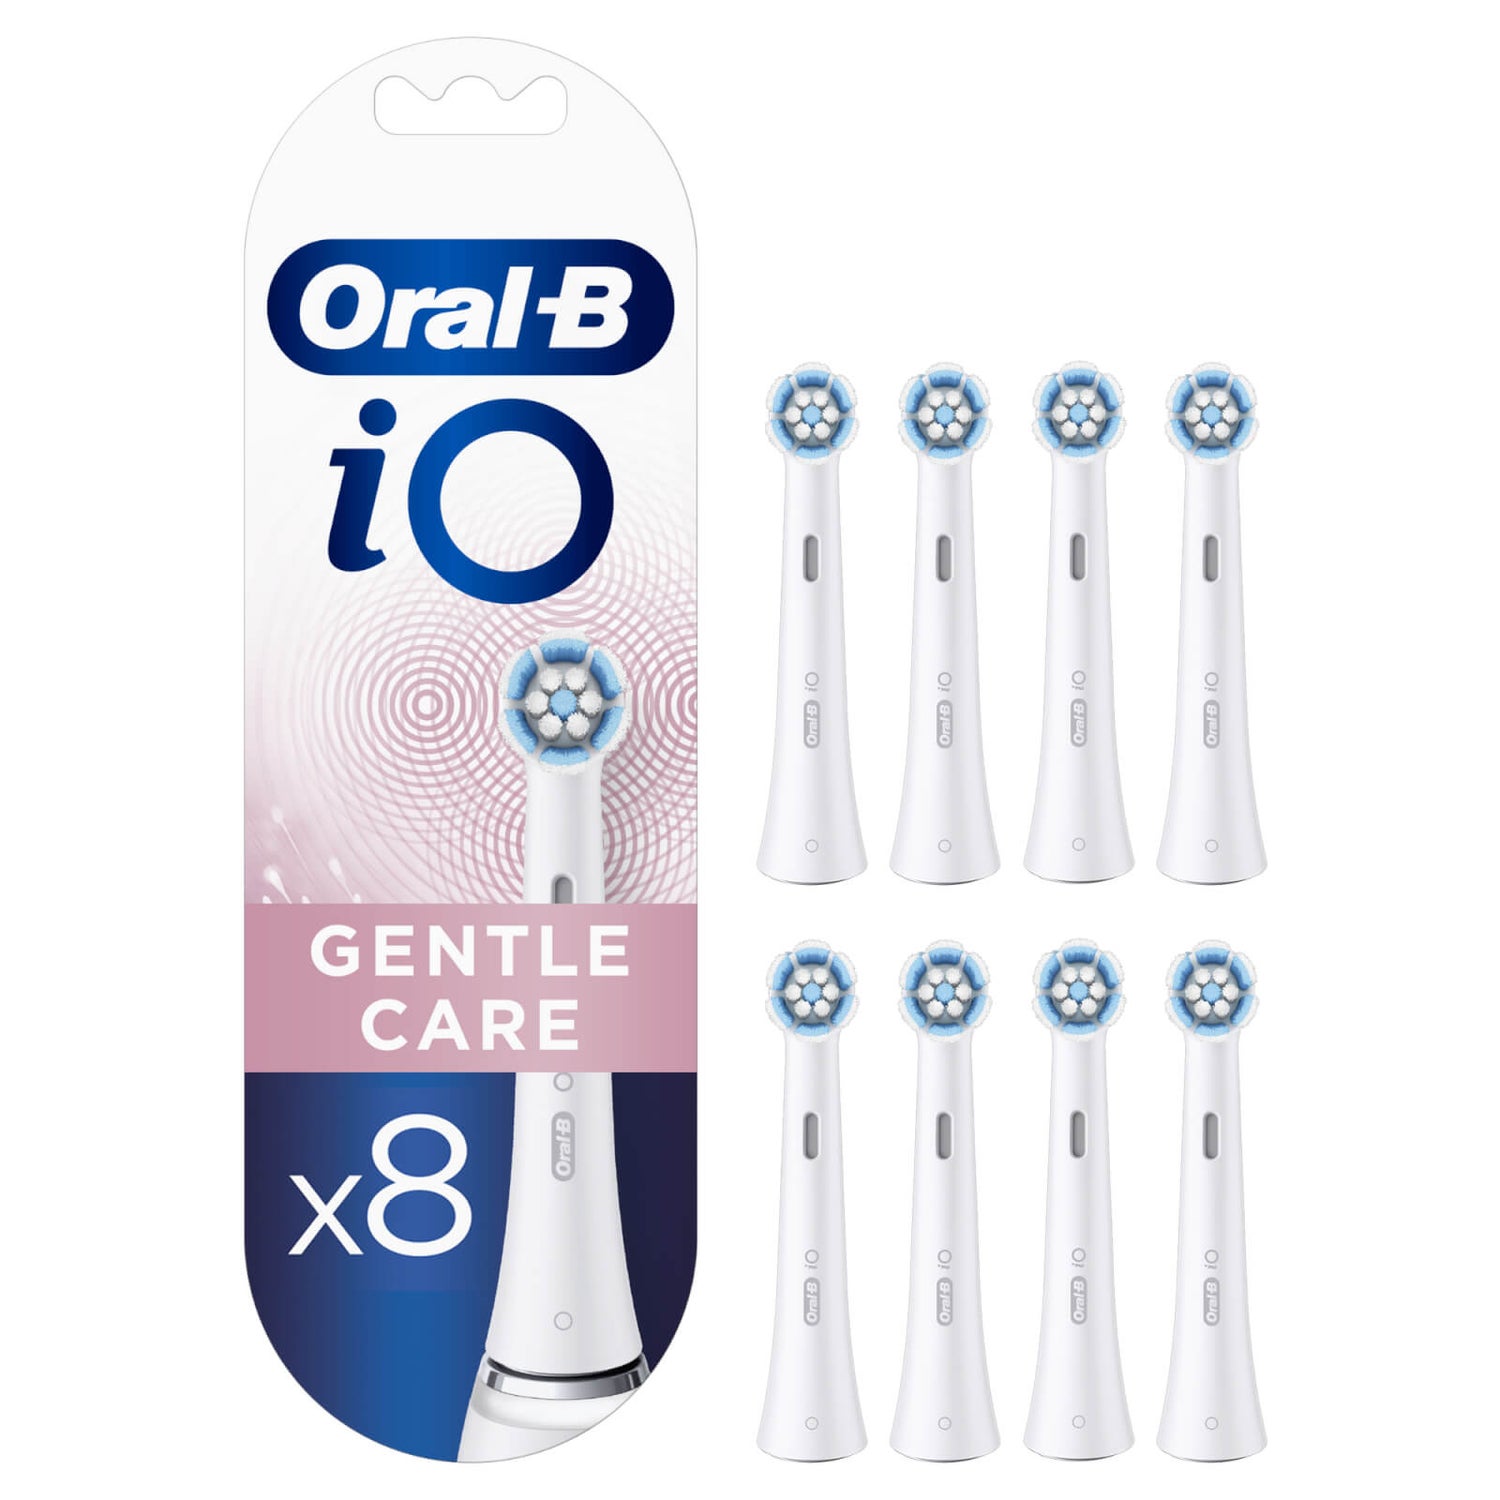 Oral B iO Gentle Care Toothbrush Heads, Pack of 8 Counts